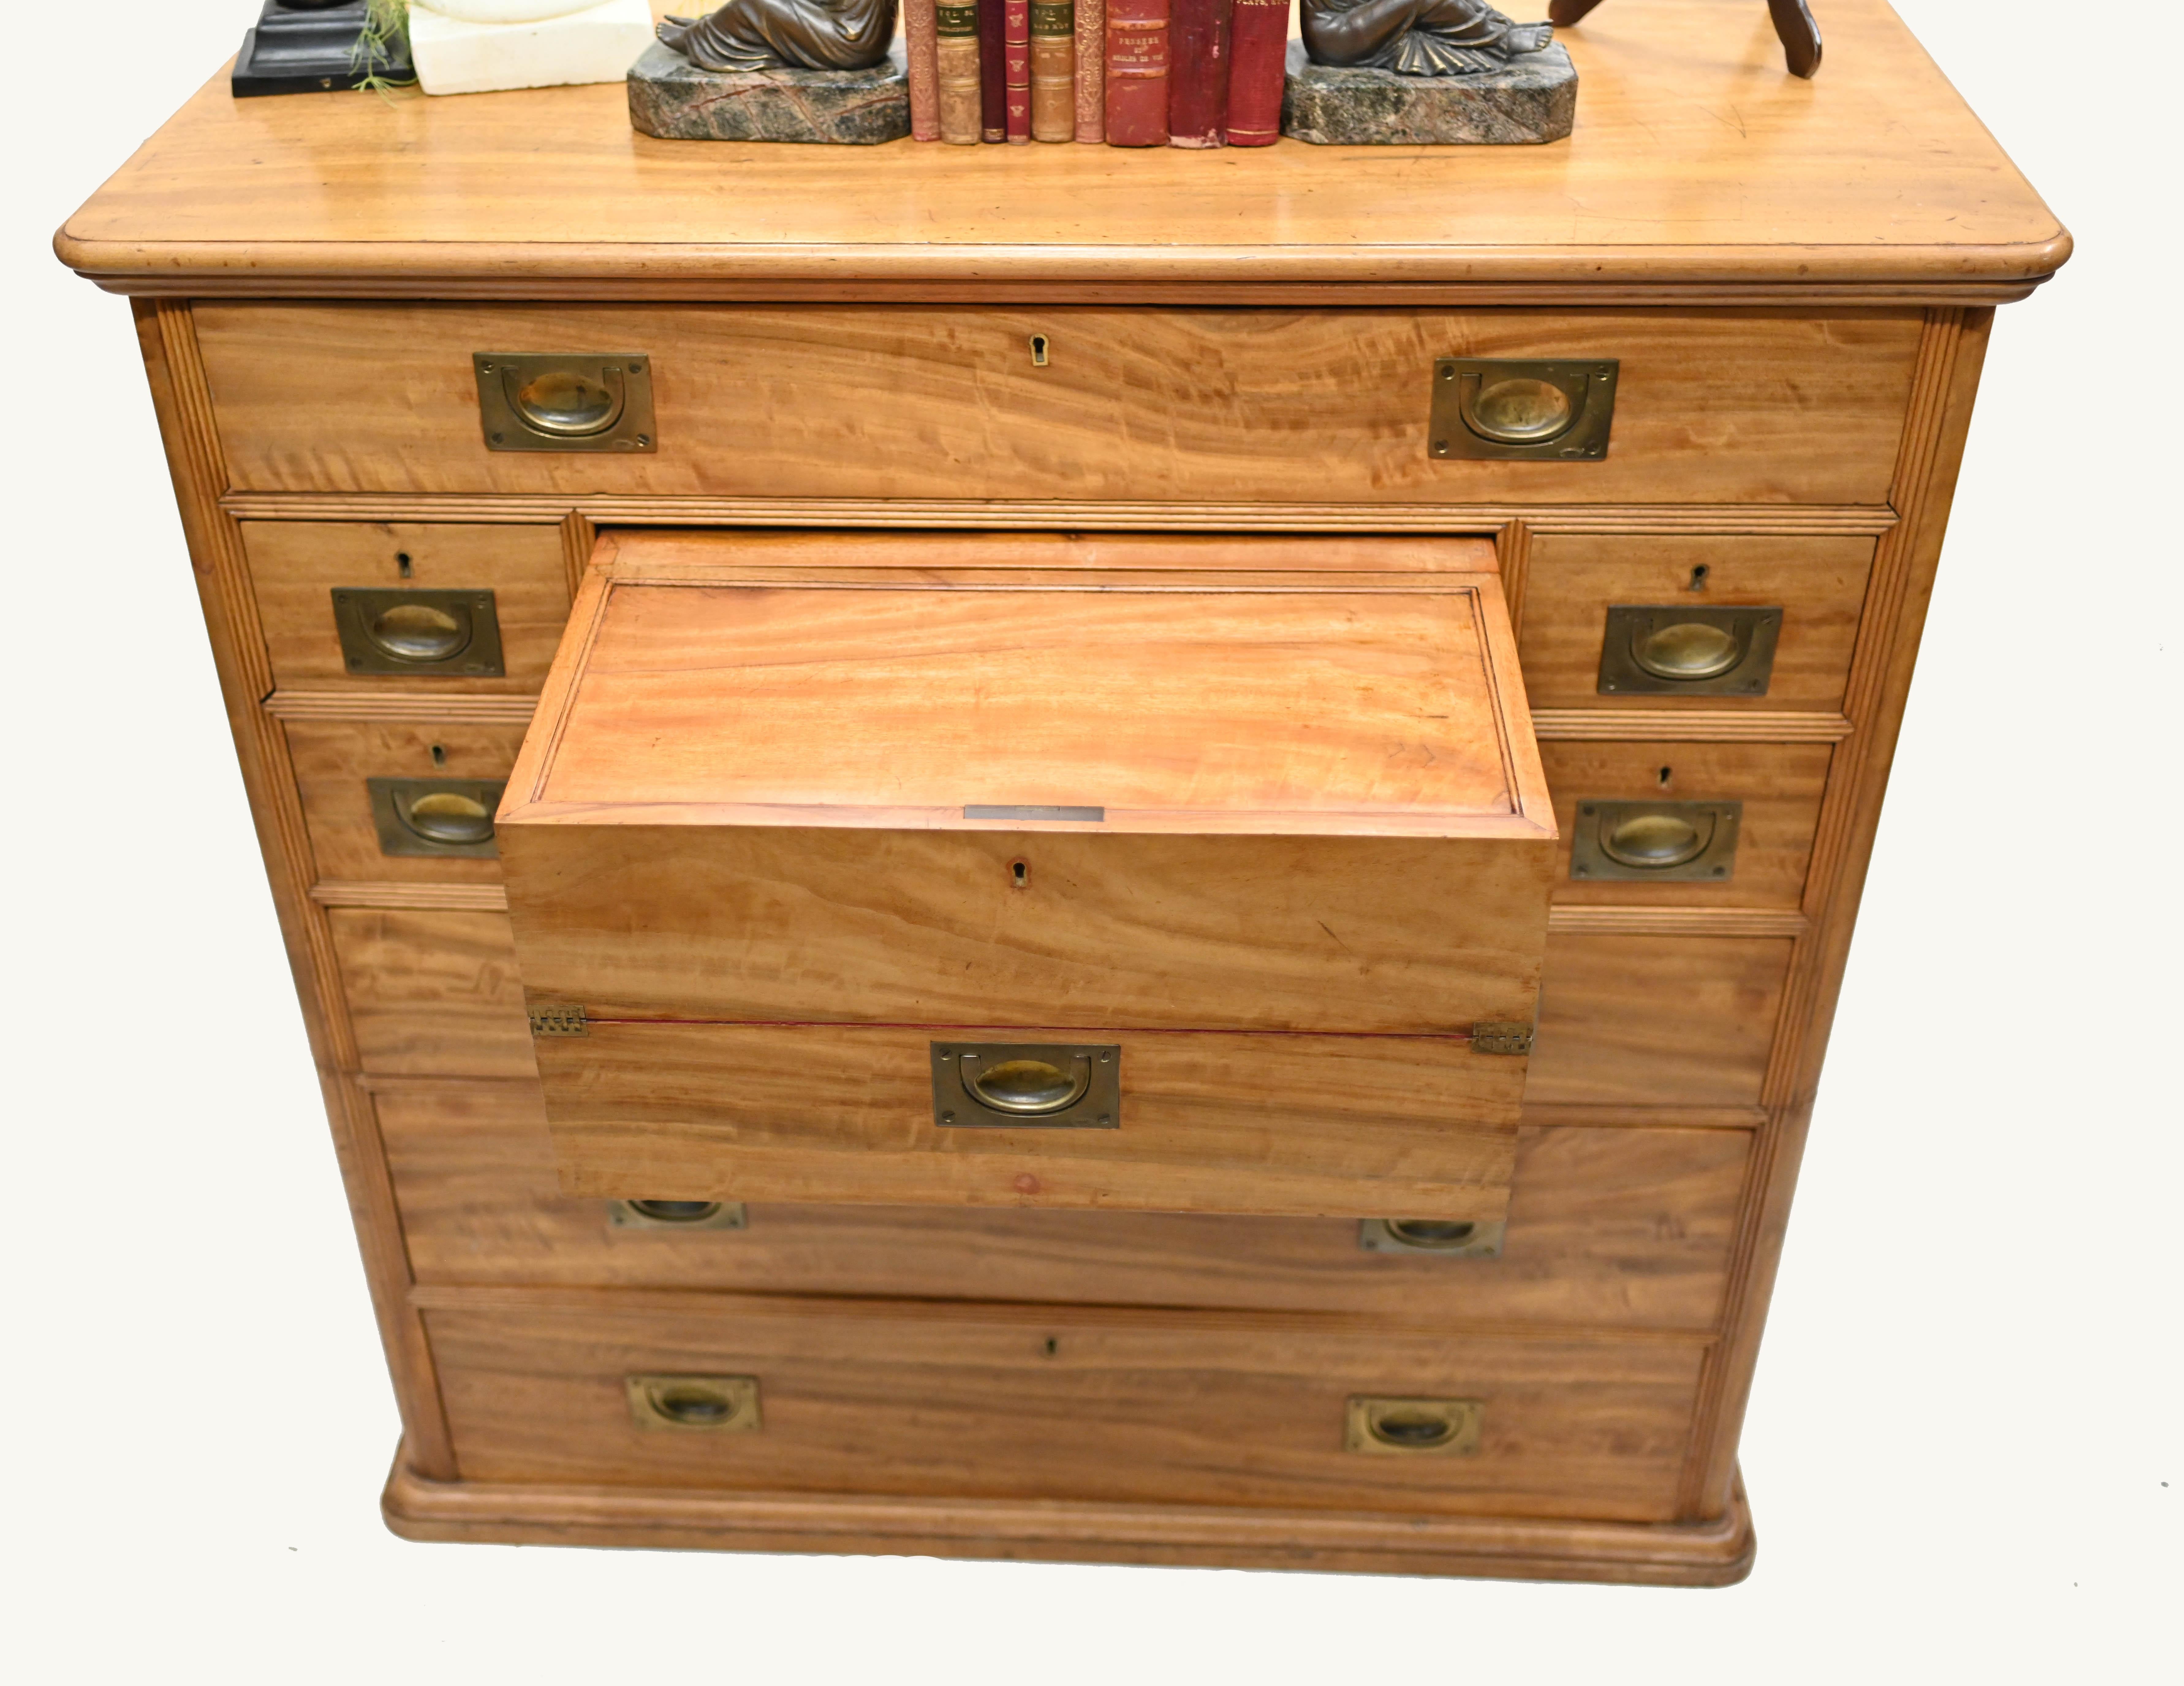 You are viewing a highly sought after antique campaign chest / secretary
The piece has been crafted from camphor wood and is circa 1910
The central section opens out to reveal the red felt finished writing surface
Around this are mini drawers and